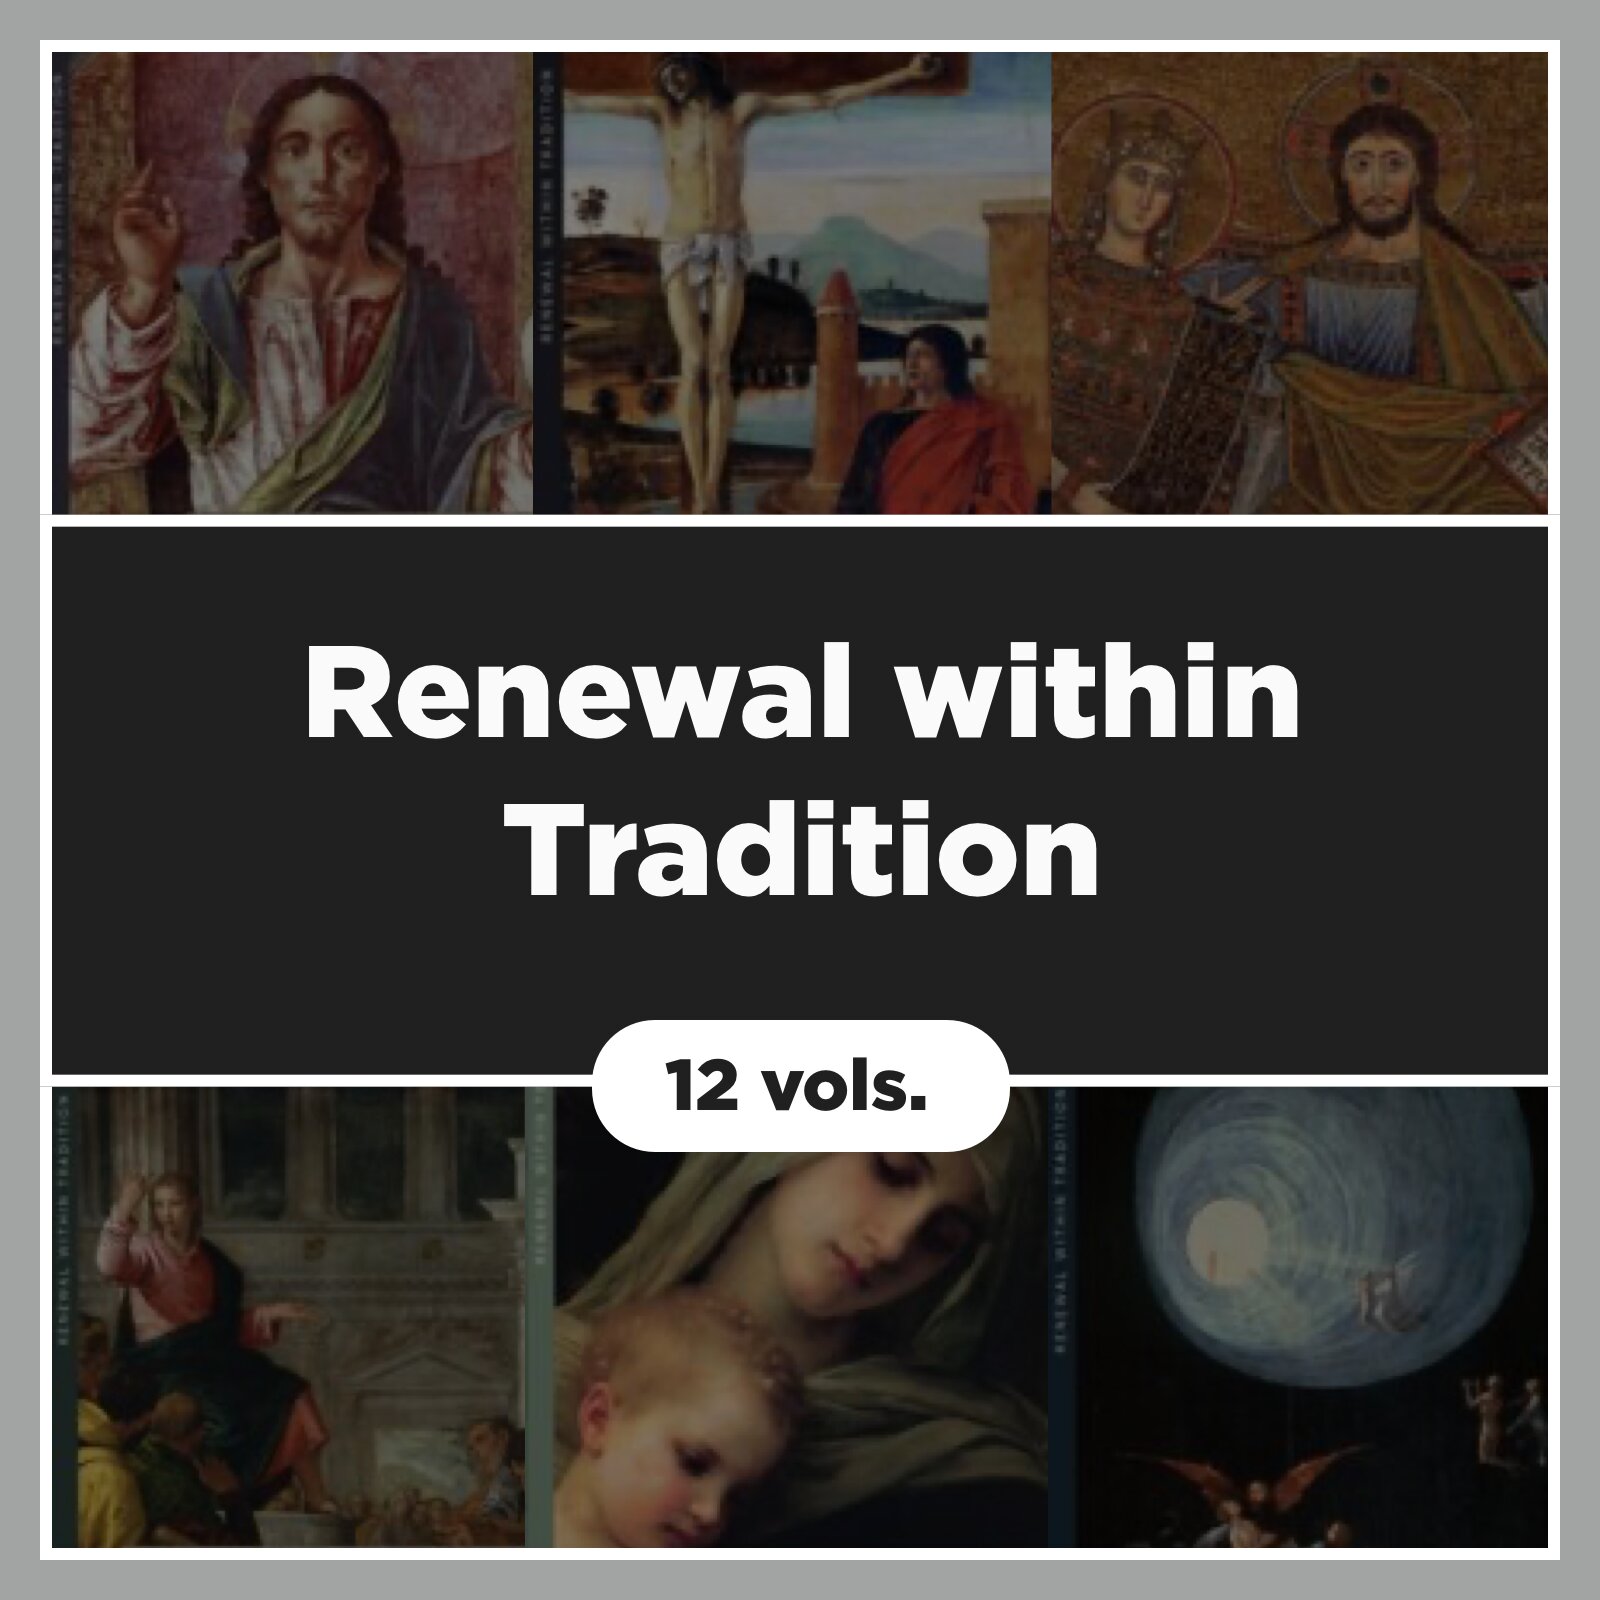 Renewal within Tradition (12 vols.)